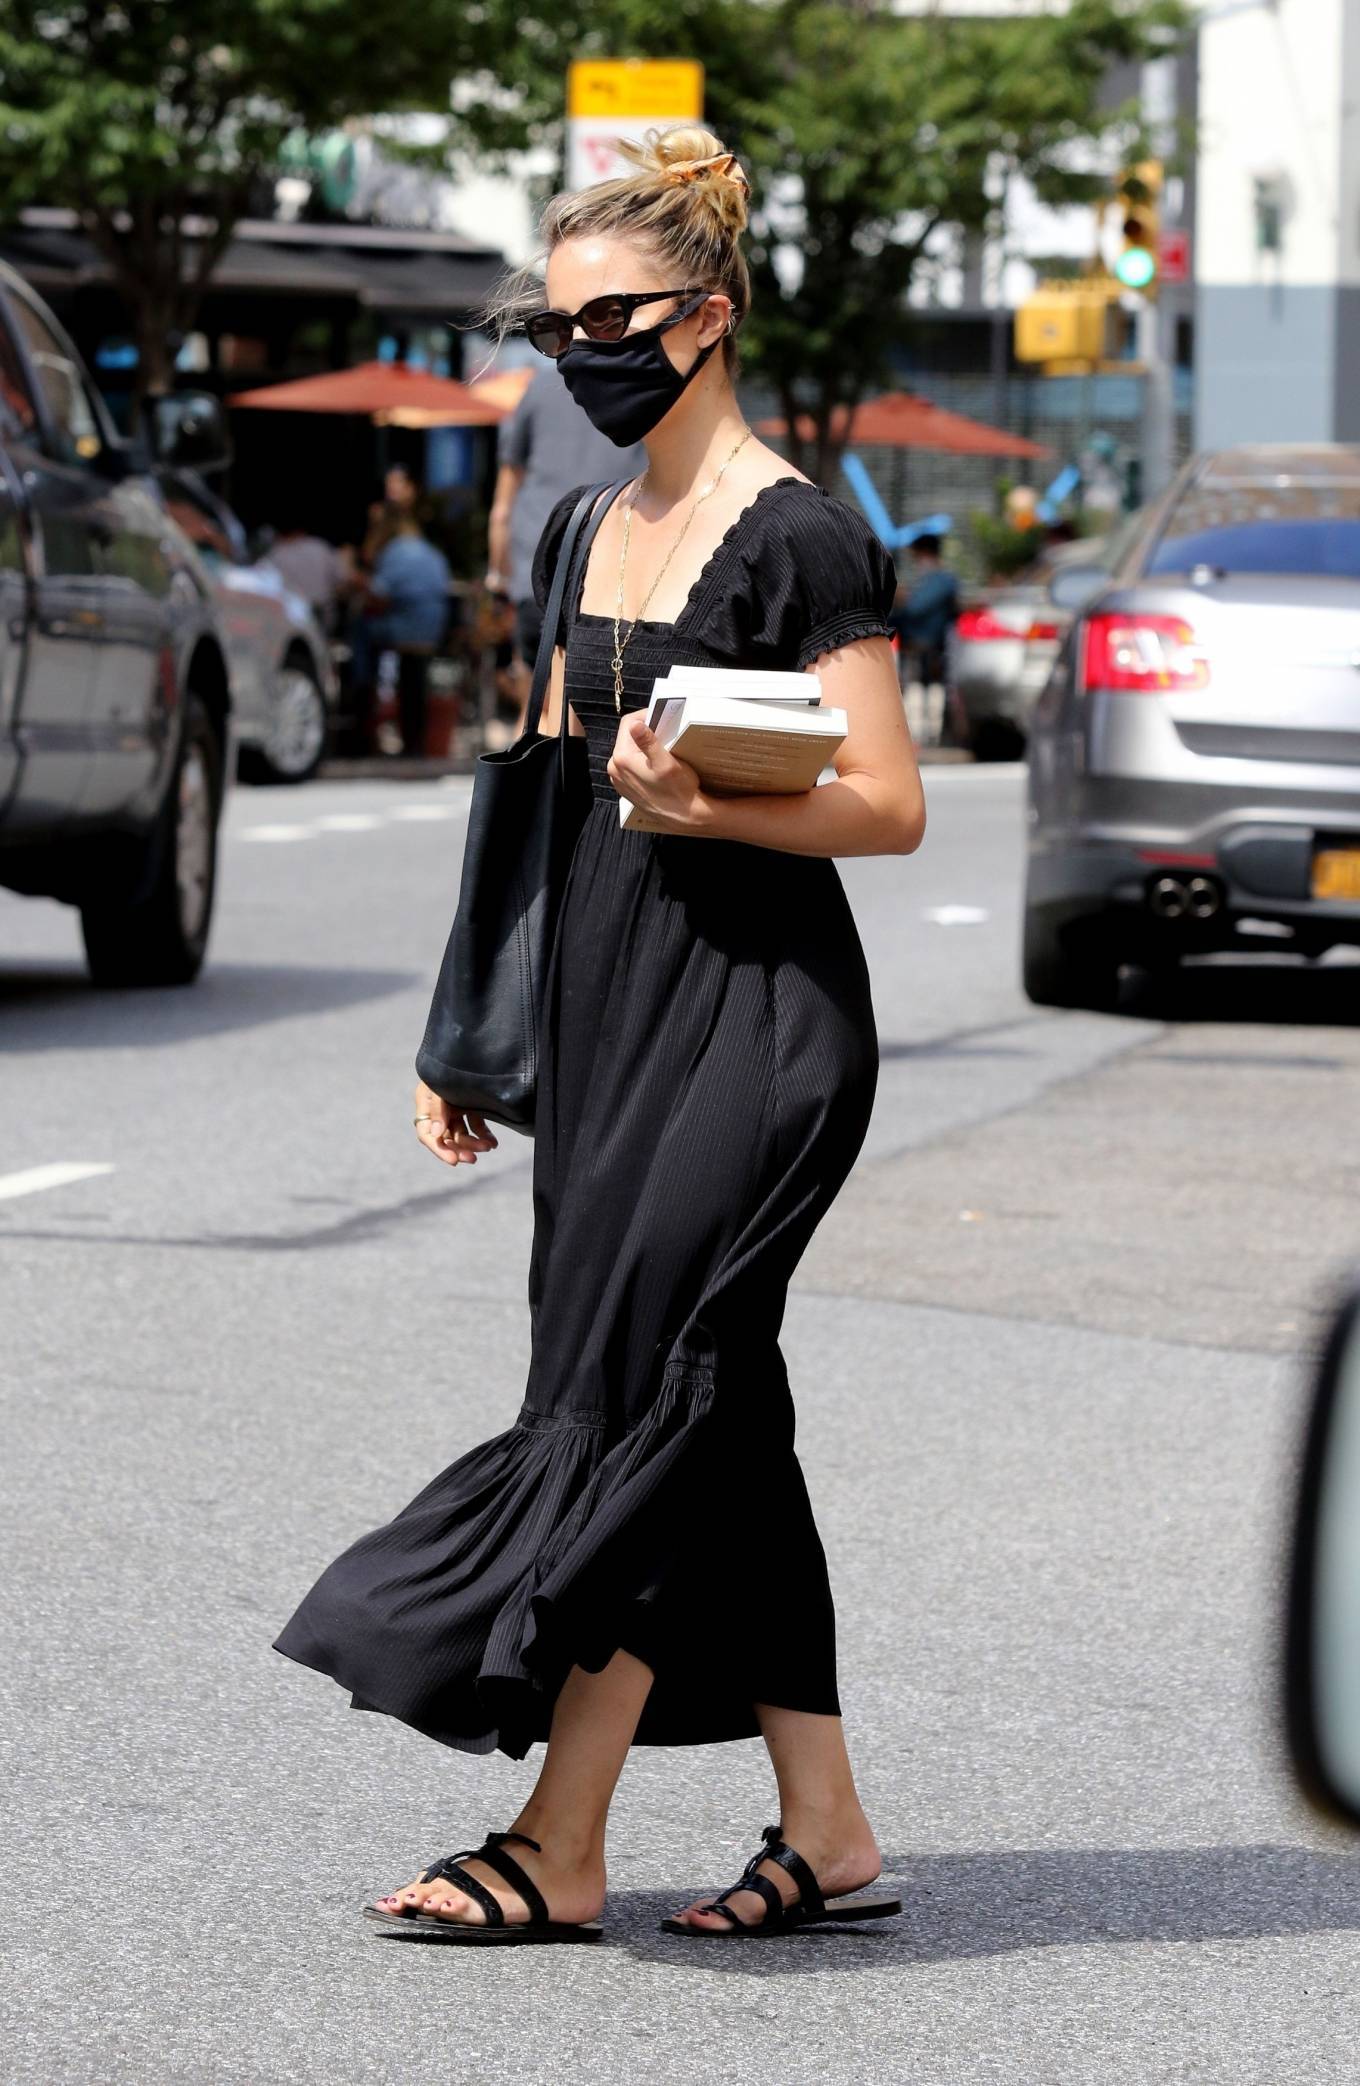 Dianna Agron - In black maxi dress out in NYC-20 | GotCeleb